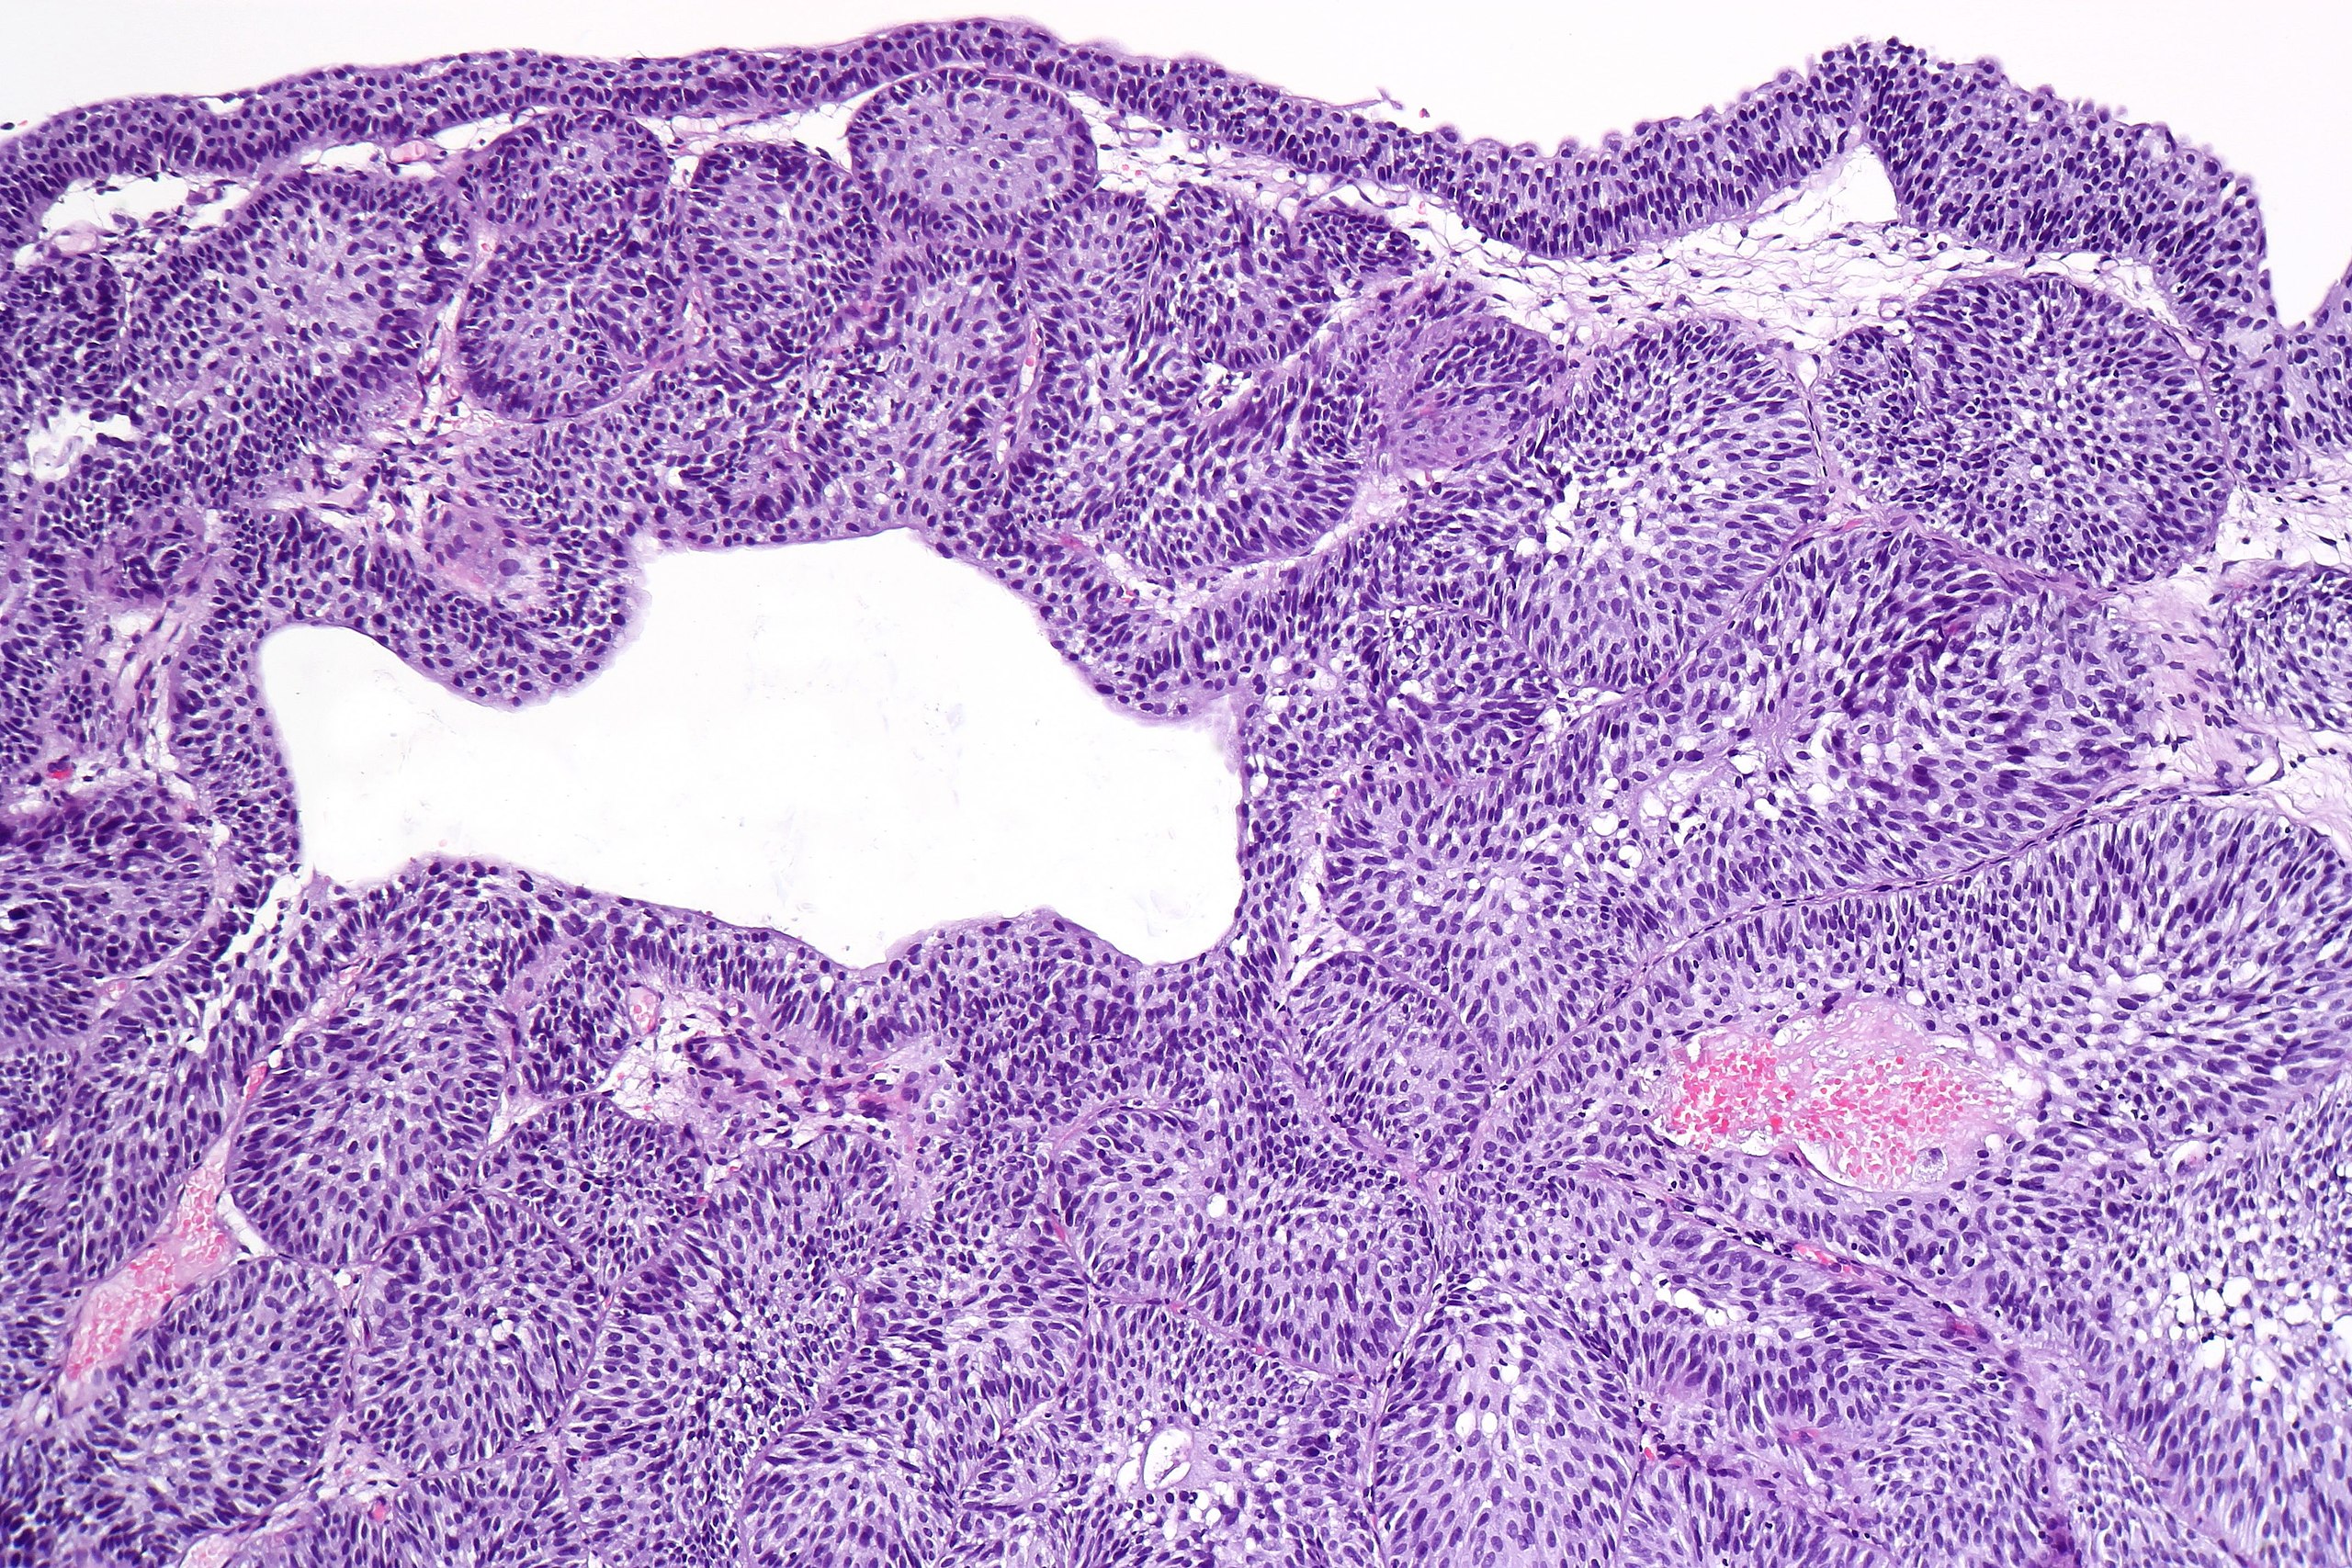 Urothelial inverted papilloma pathology outlines